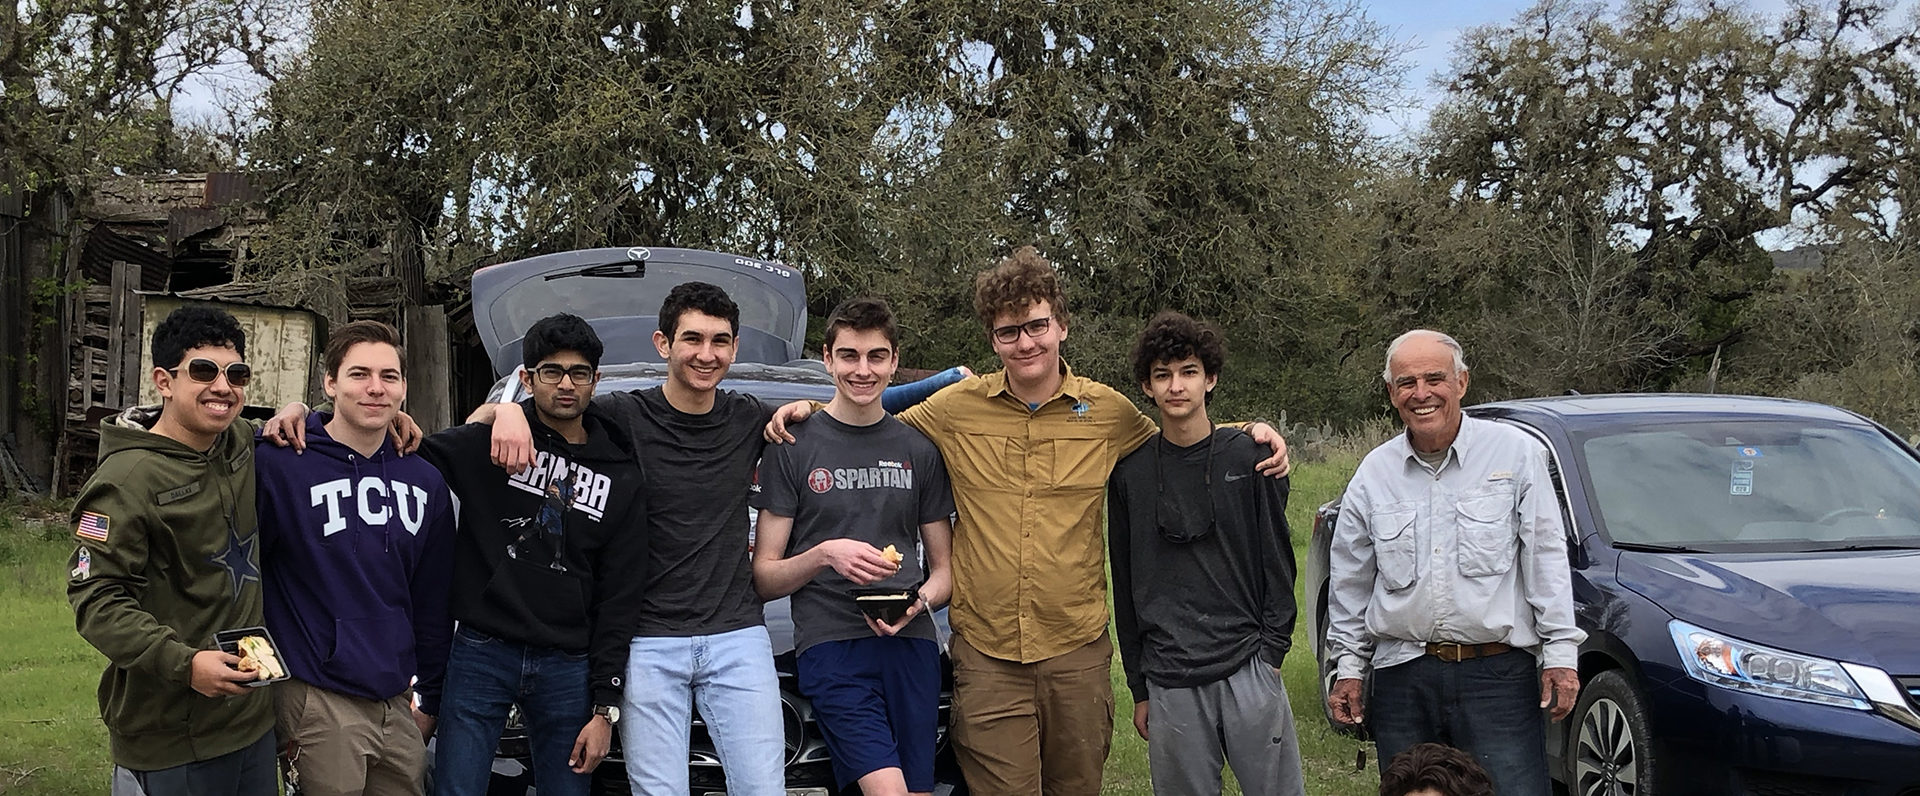 The volunteers, from left to right: from left to right: Benjamin Gonzales, Benjamin Bates, Gautam Ramireddy, Marc Choucair, Andrew Monreal, Nate Gulde, Devon Hooper, Bernardo Reyes, and scout liaison Dave Kibler . Photo by Mackenzie Brown